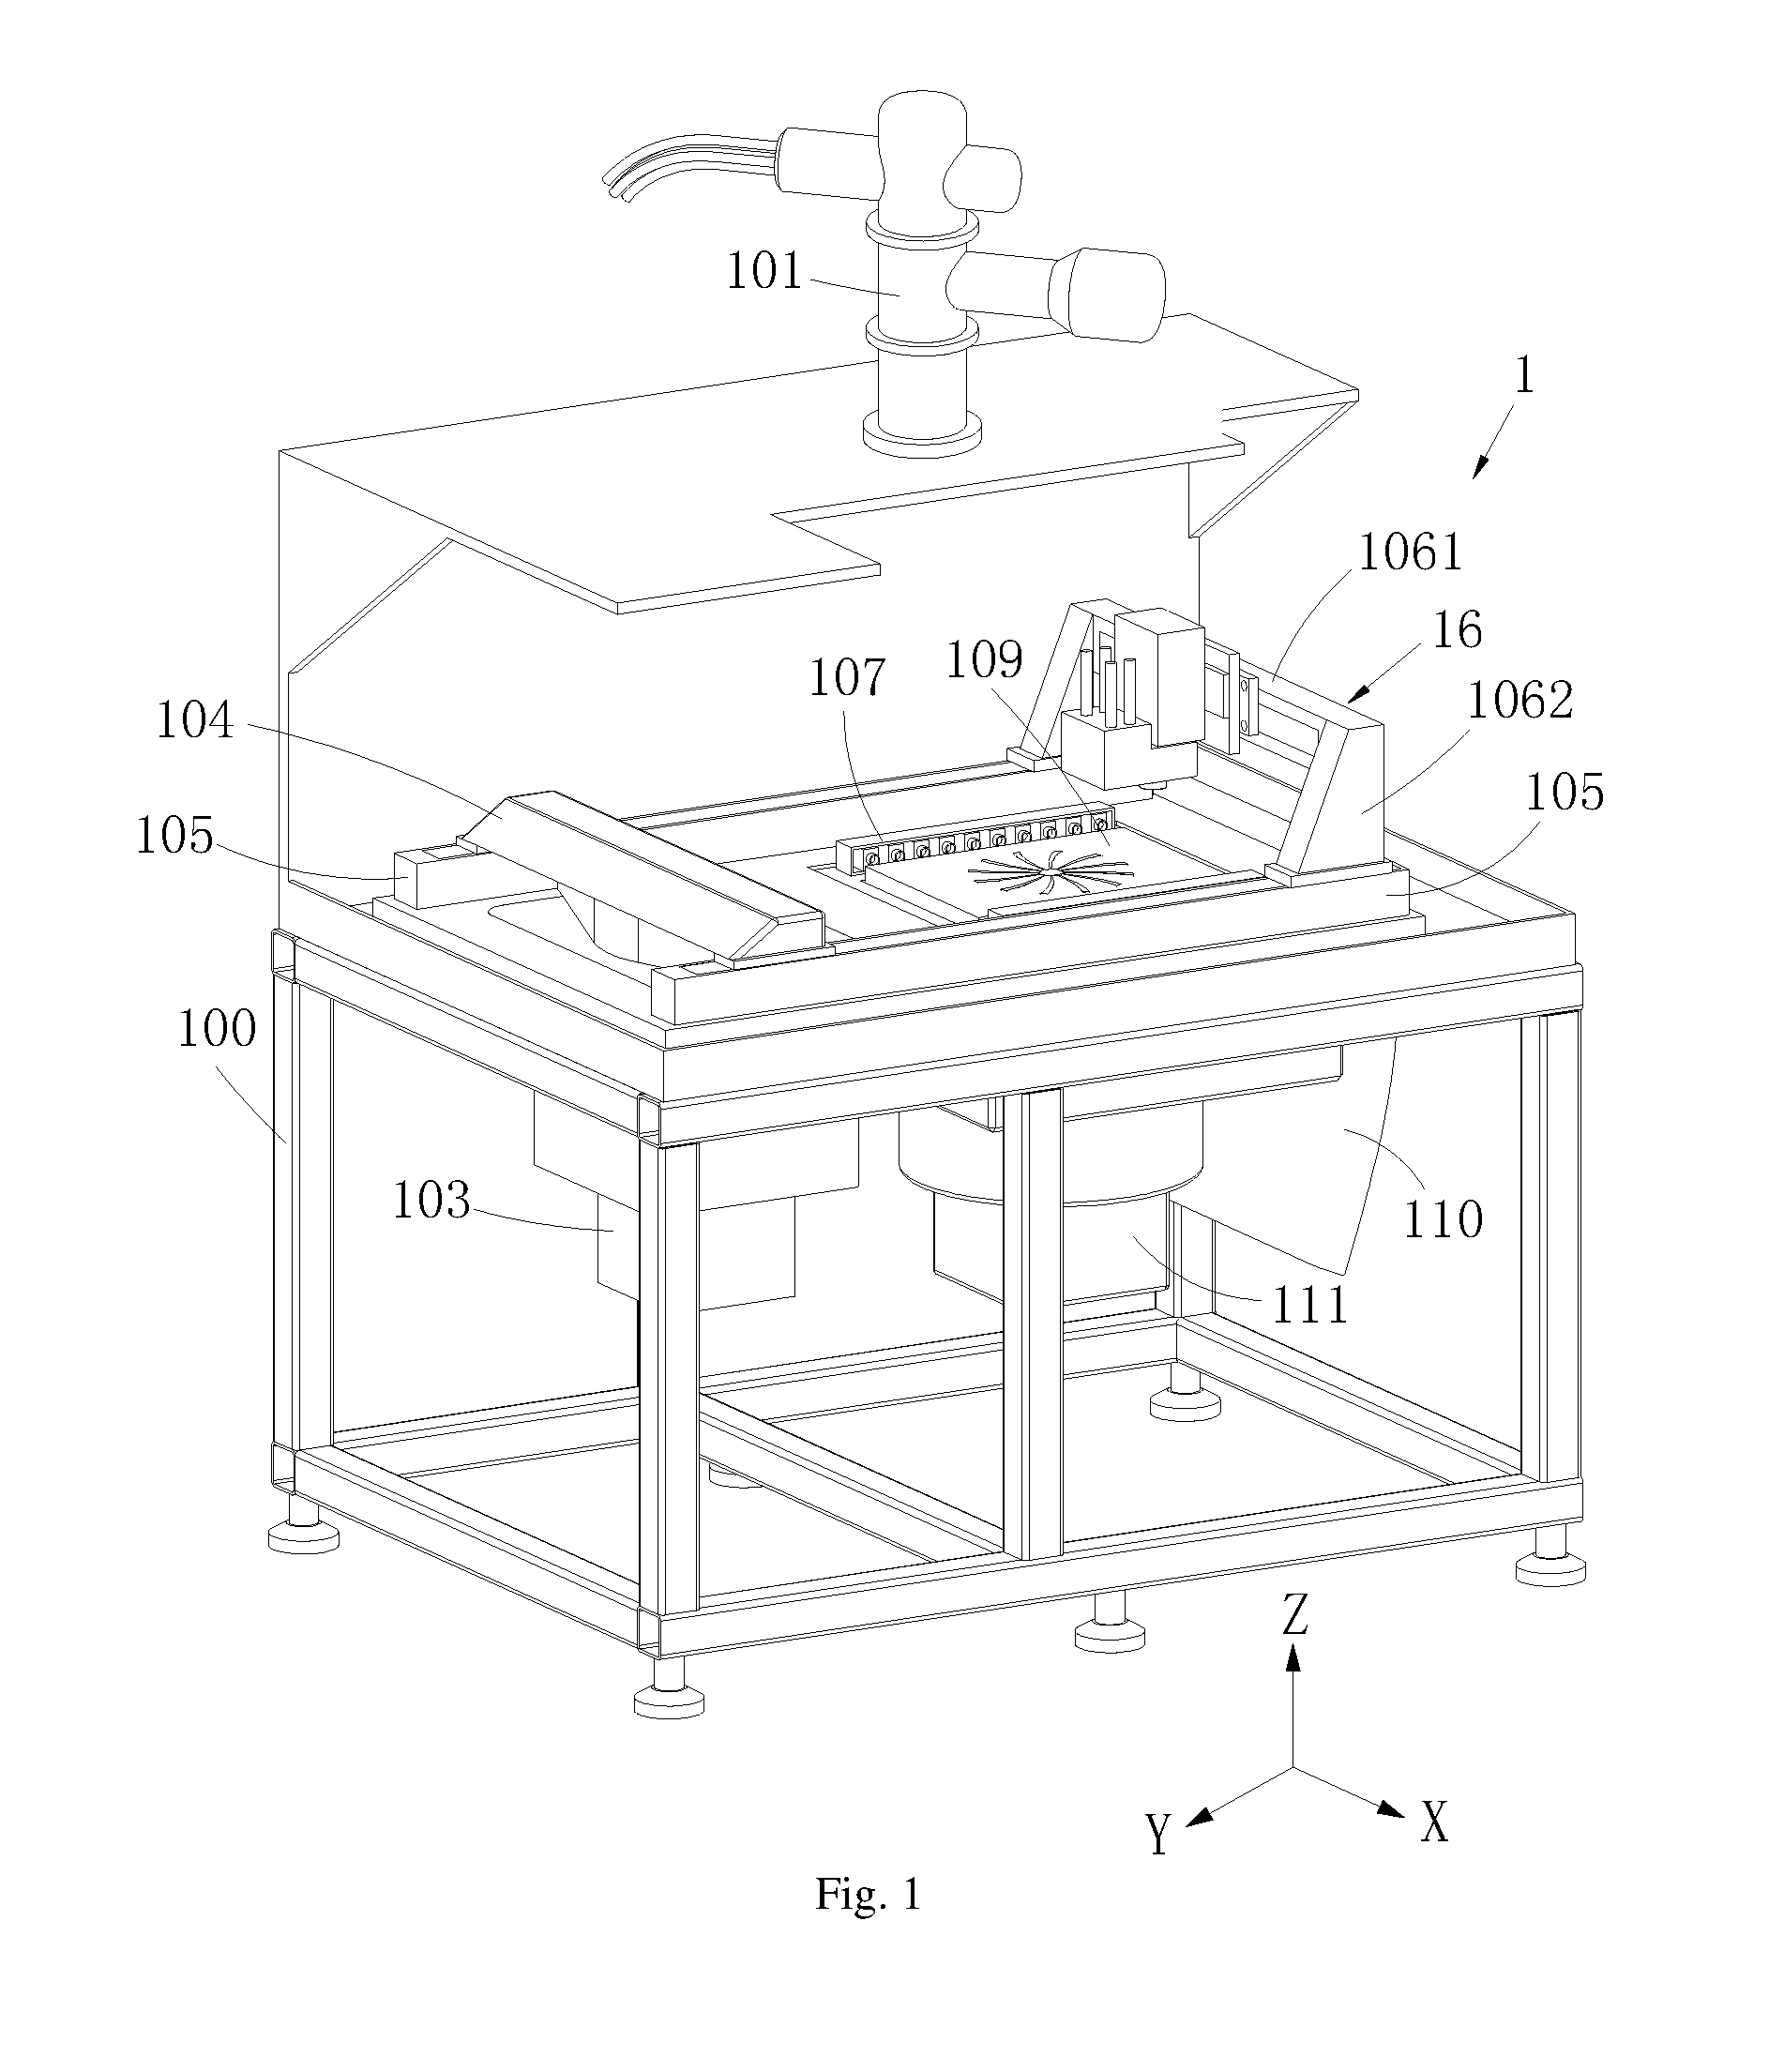 Electron beam melting and laser milling composite 3D printing apparatus